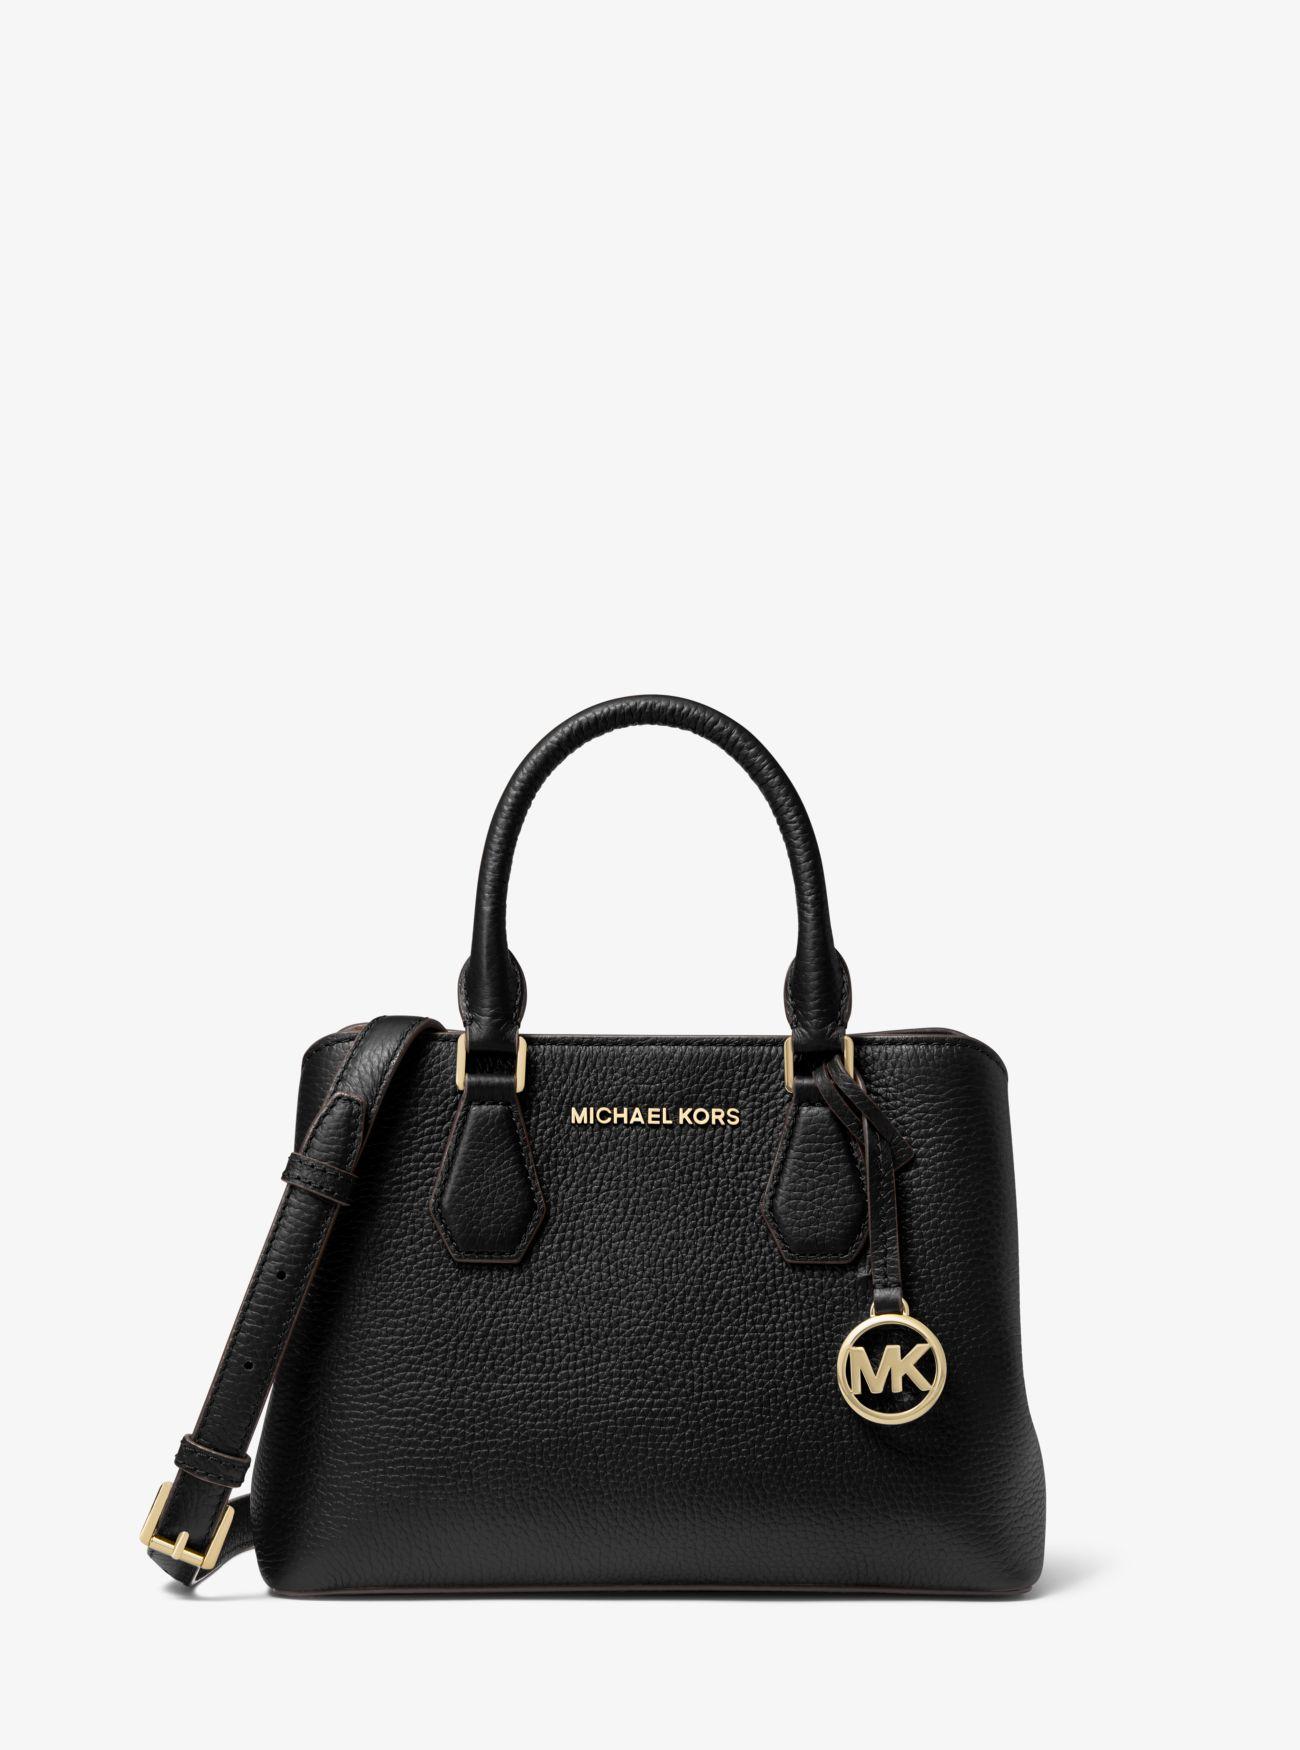 Michael Kors Mk Camille Small Pebbled Leather Satchel in Black - Lyst